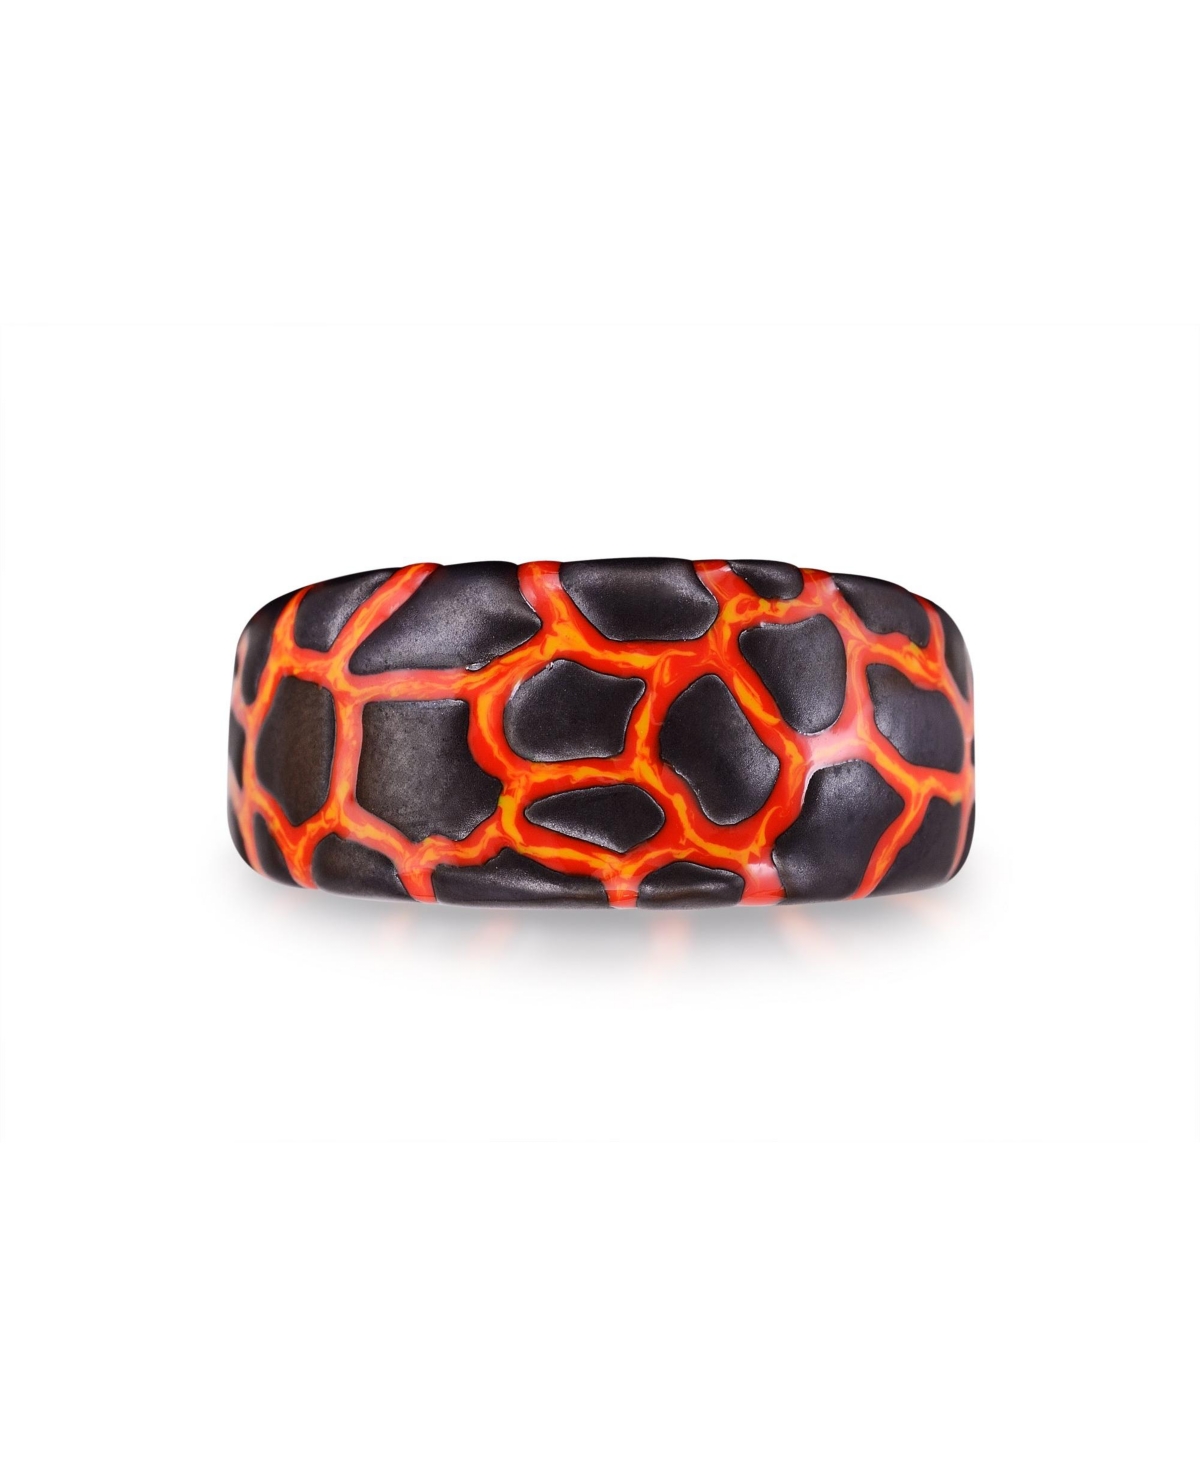 Earth Fire Design Black Rhodium Plated with Enamel Sterling Silver Band Men Ring - Red